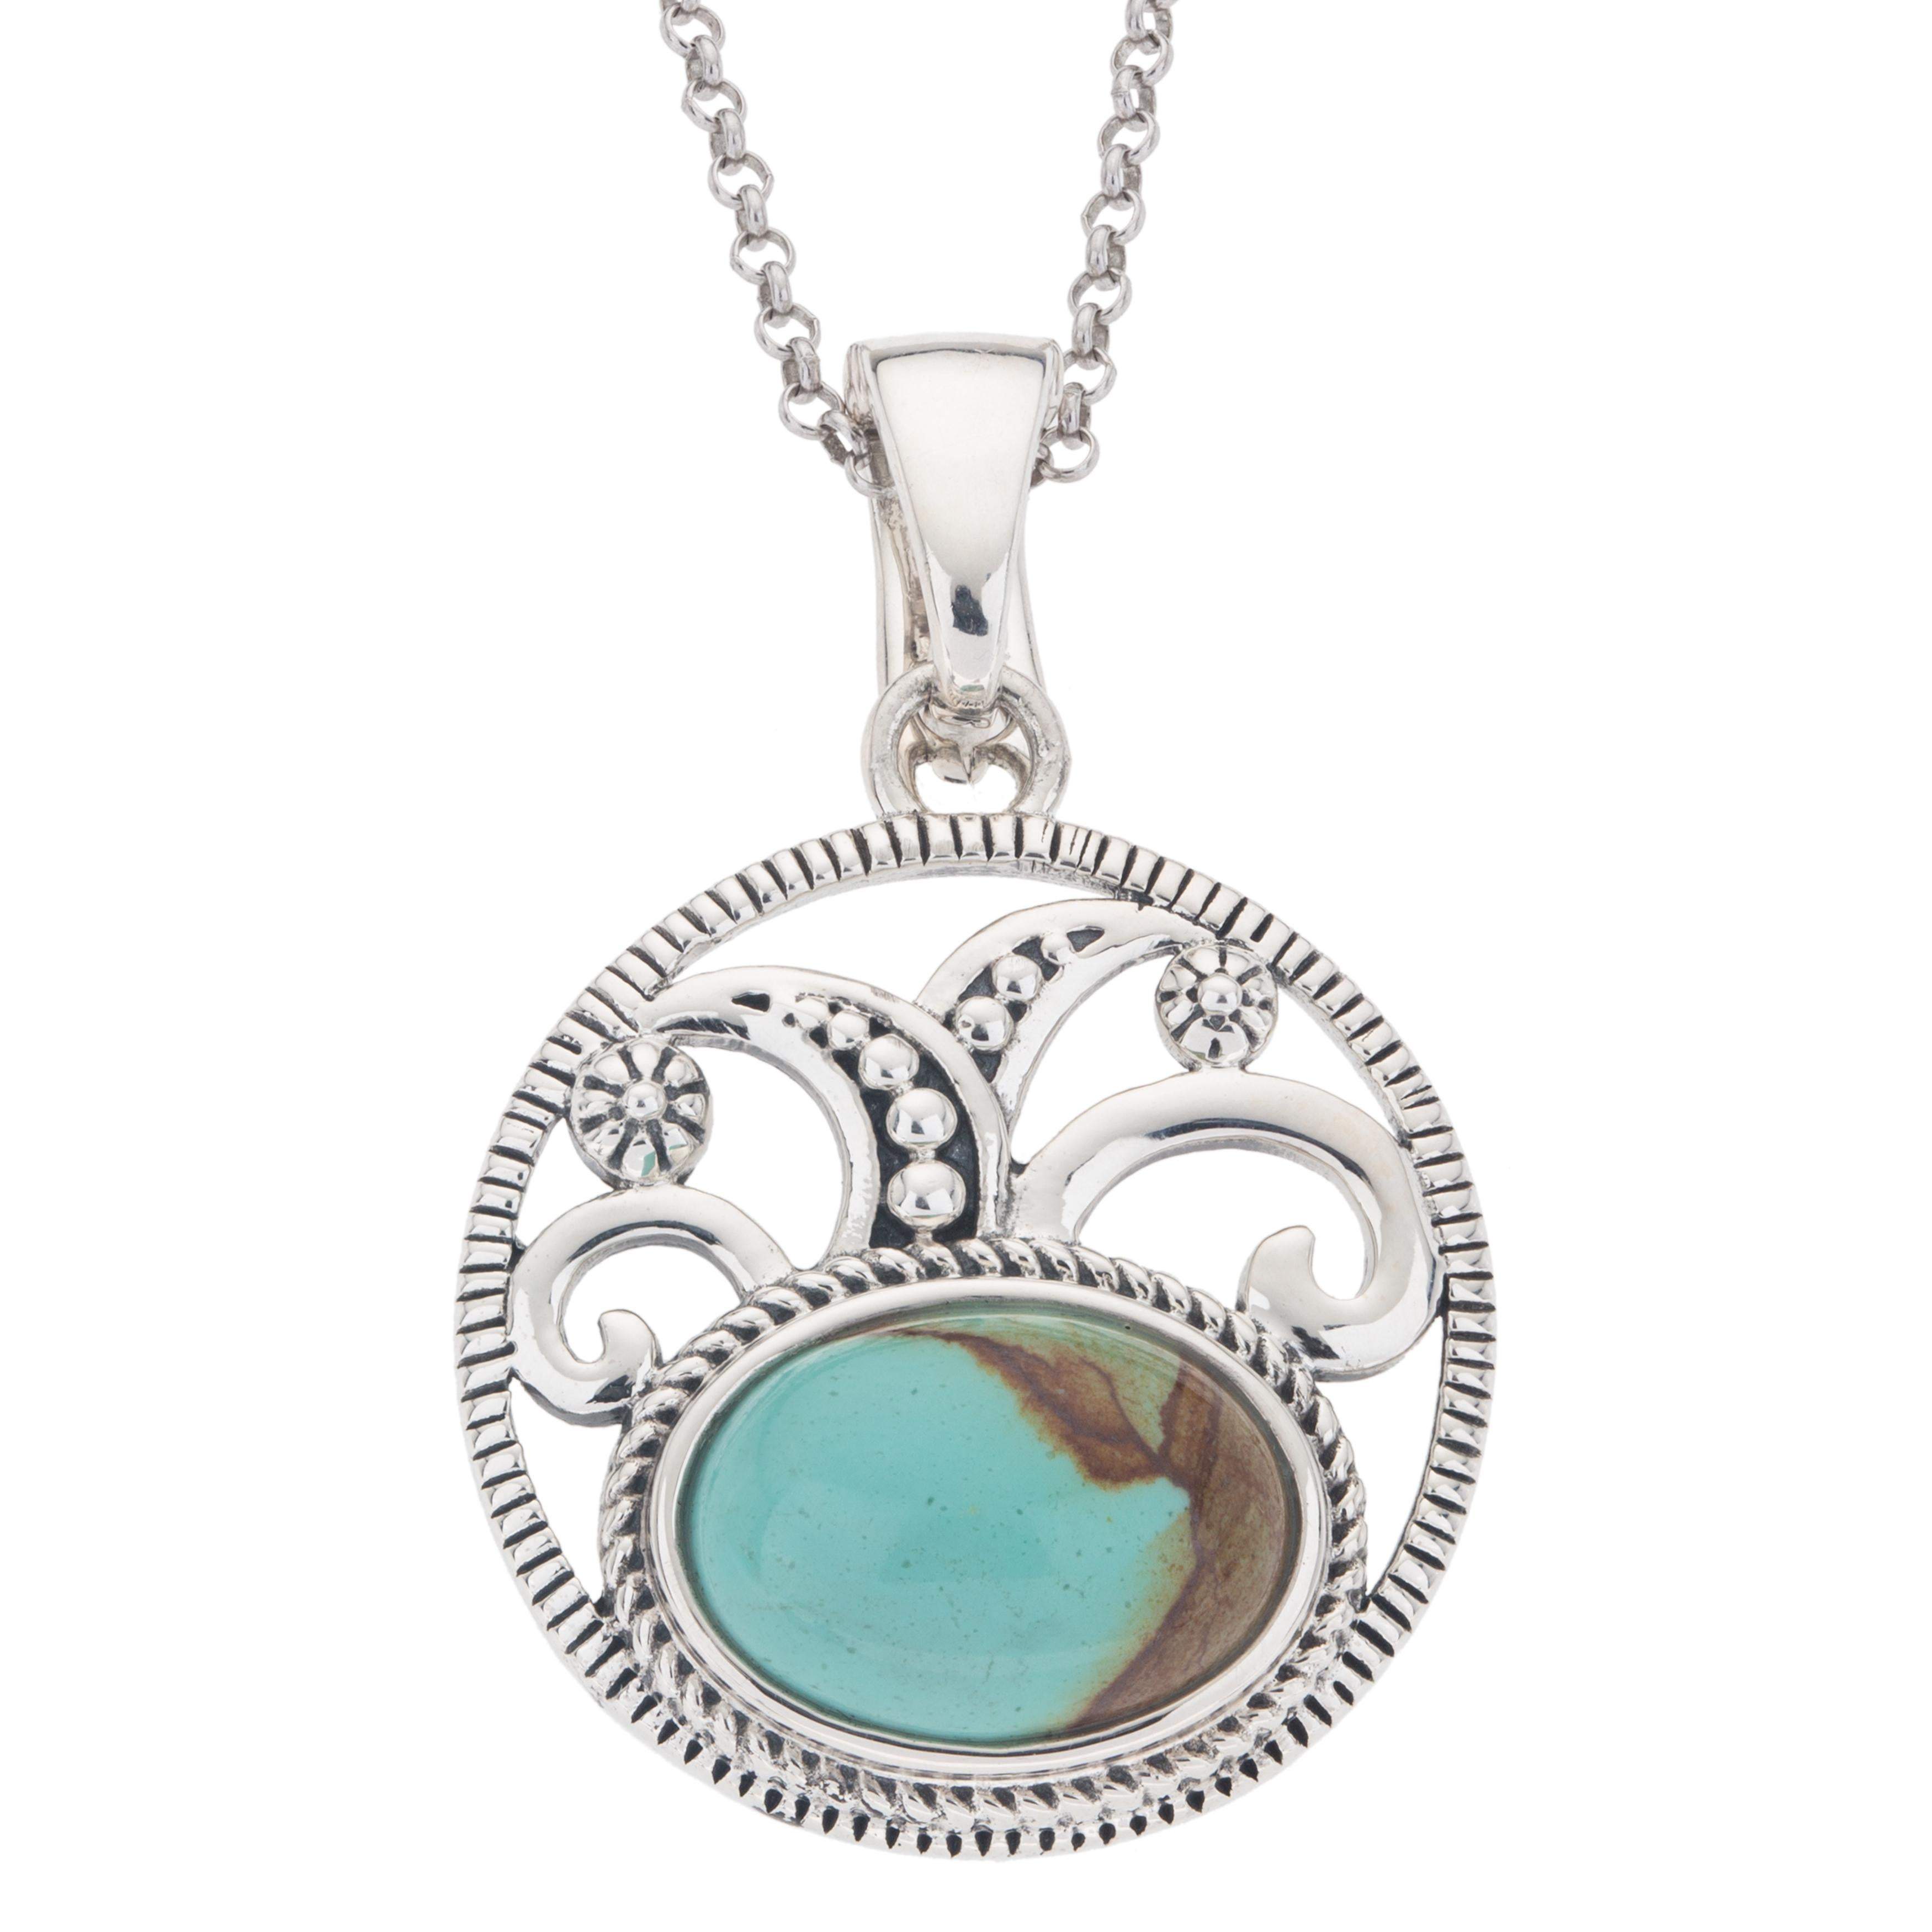 925 Silver 14x10mm Oval #8 Mine Turquoise Pendant Necklace - Shop Thrifty Treasures